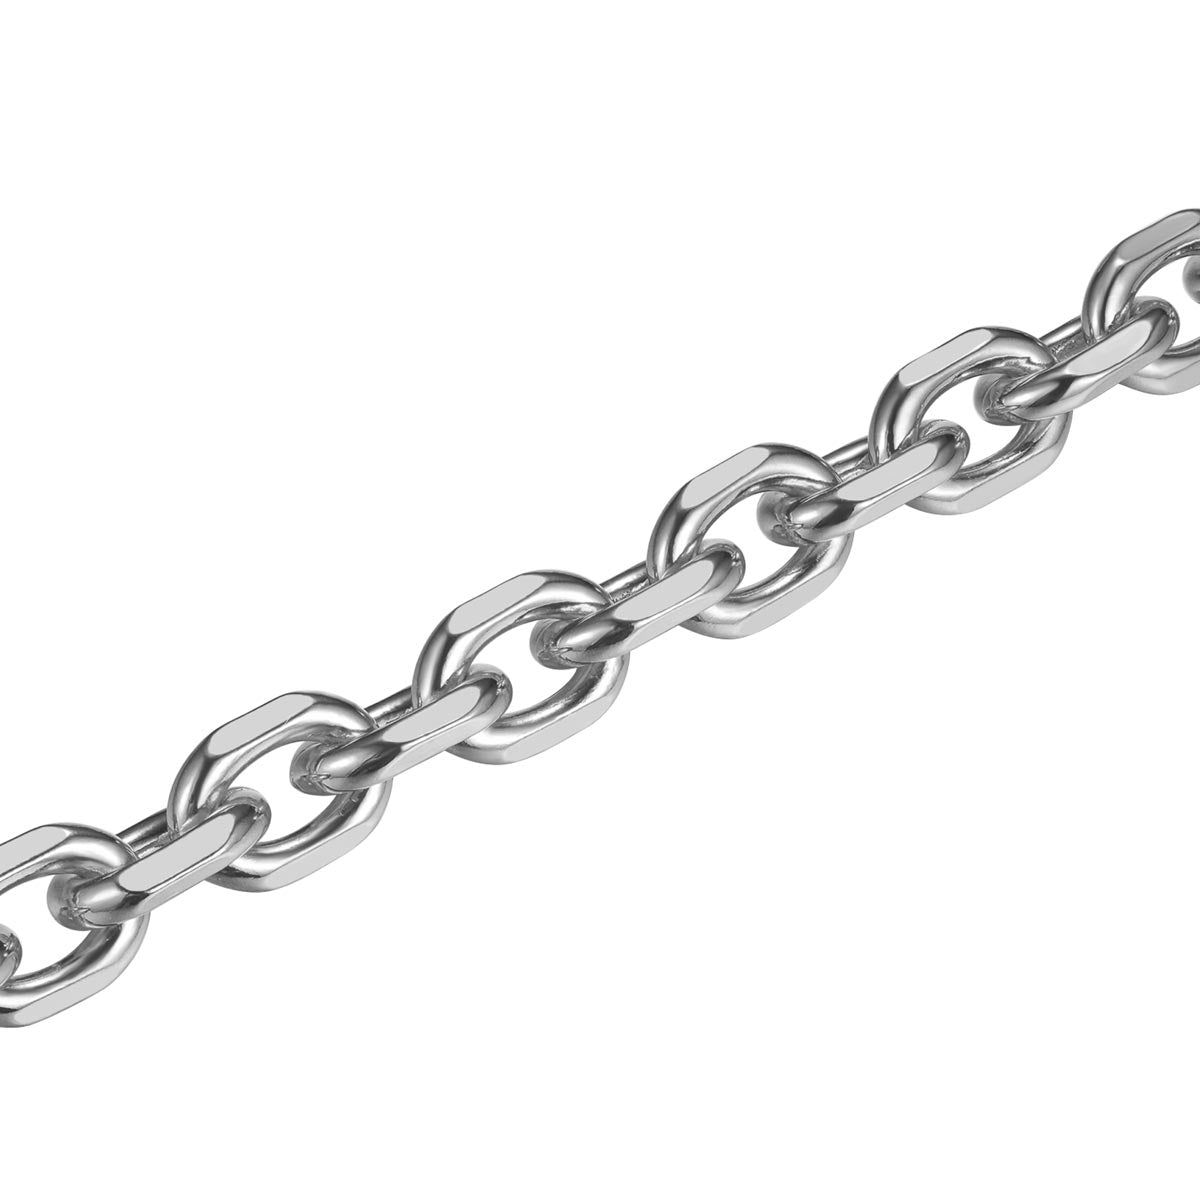 bold silver chain, close up view